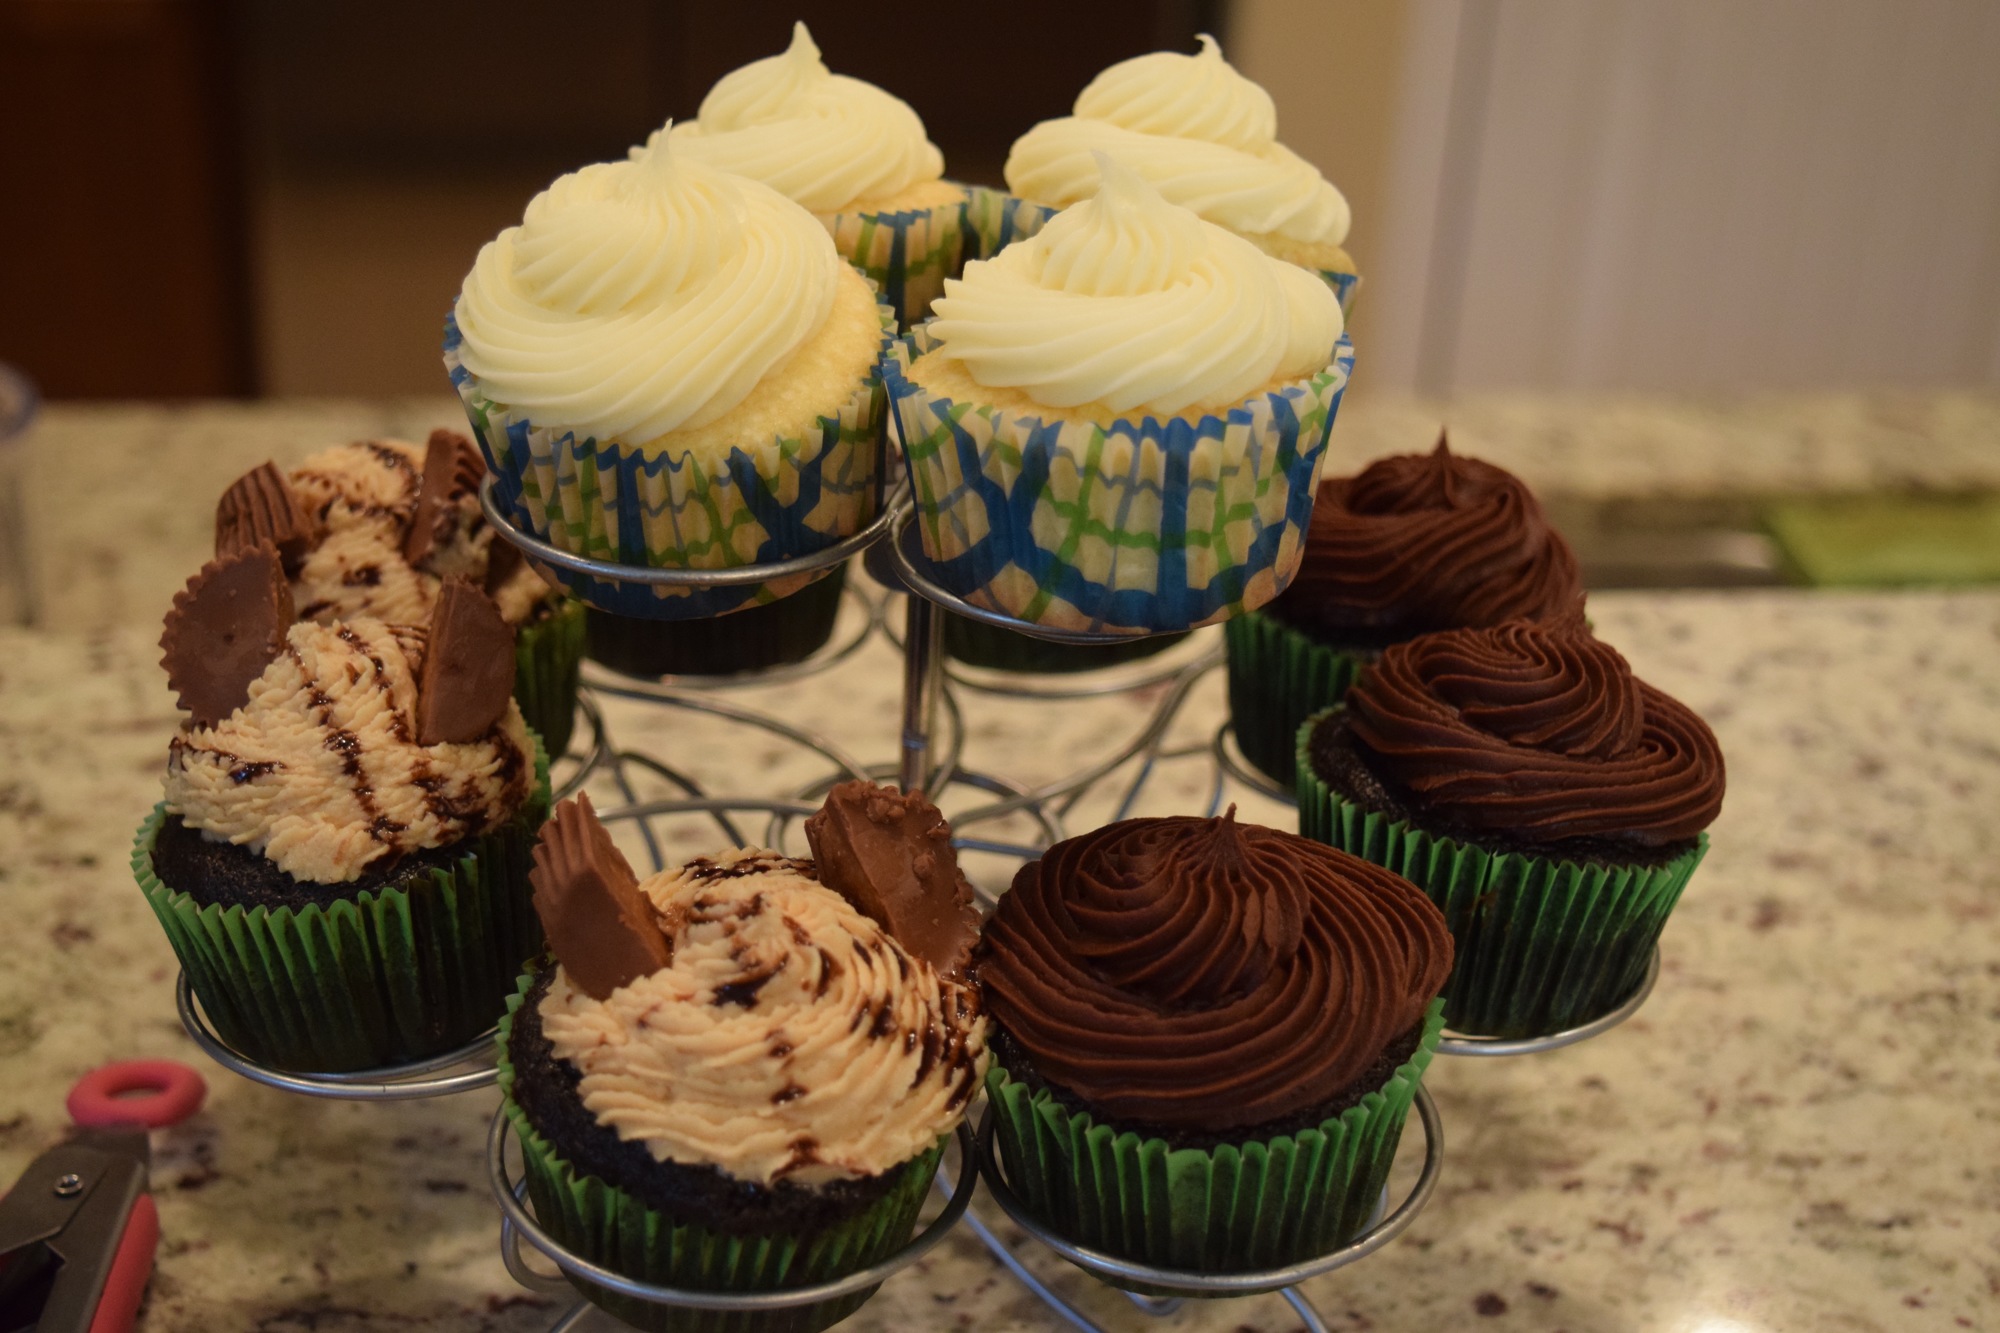 Some of the cupcake flavors offered include lemon, peanut butter chocolate and chocolate ganache.